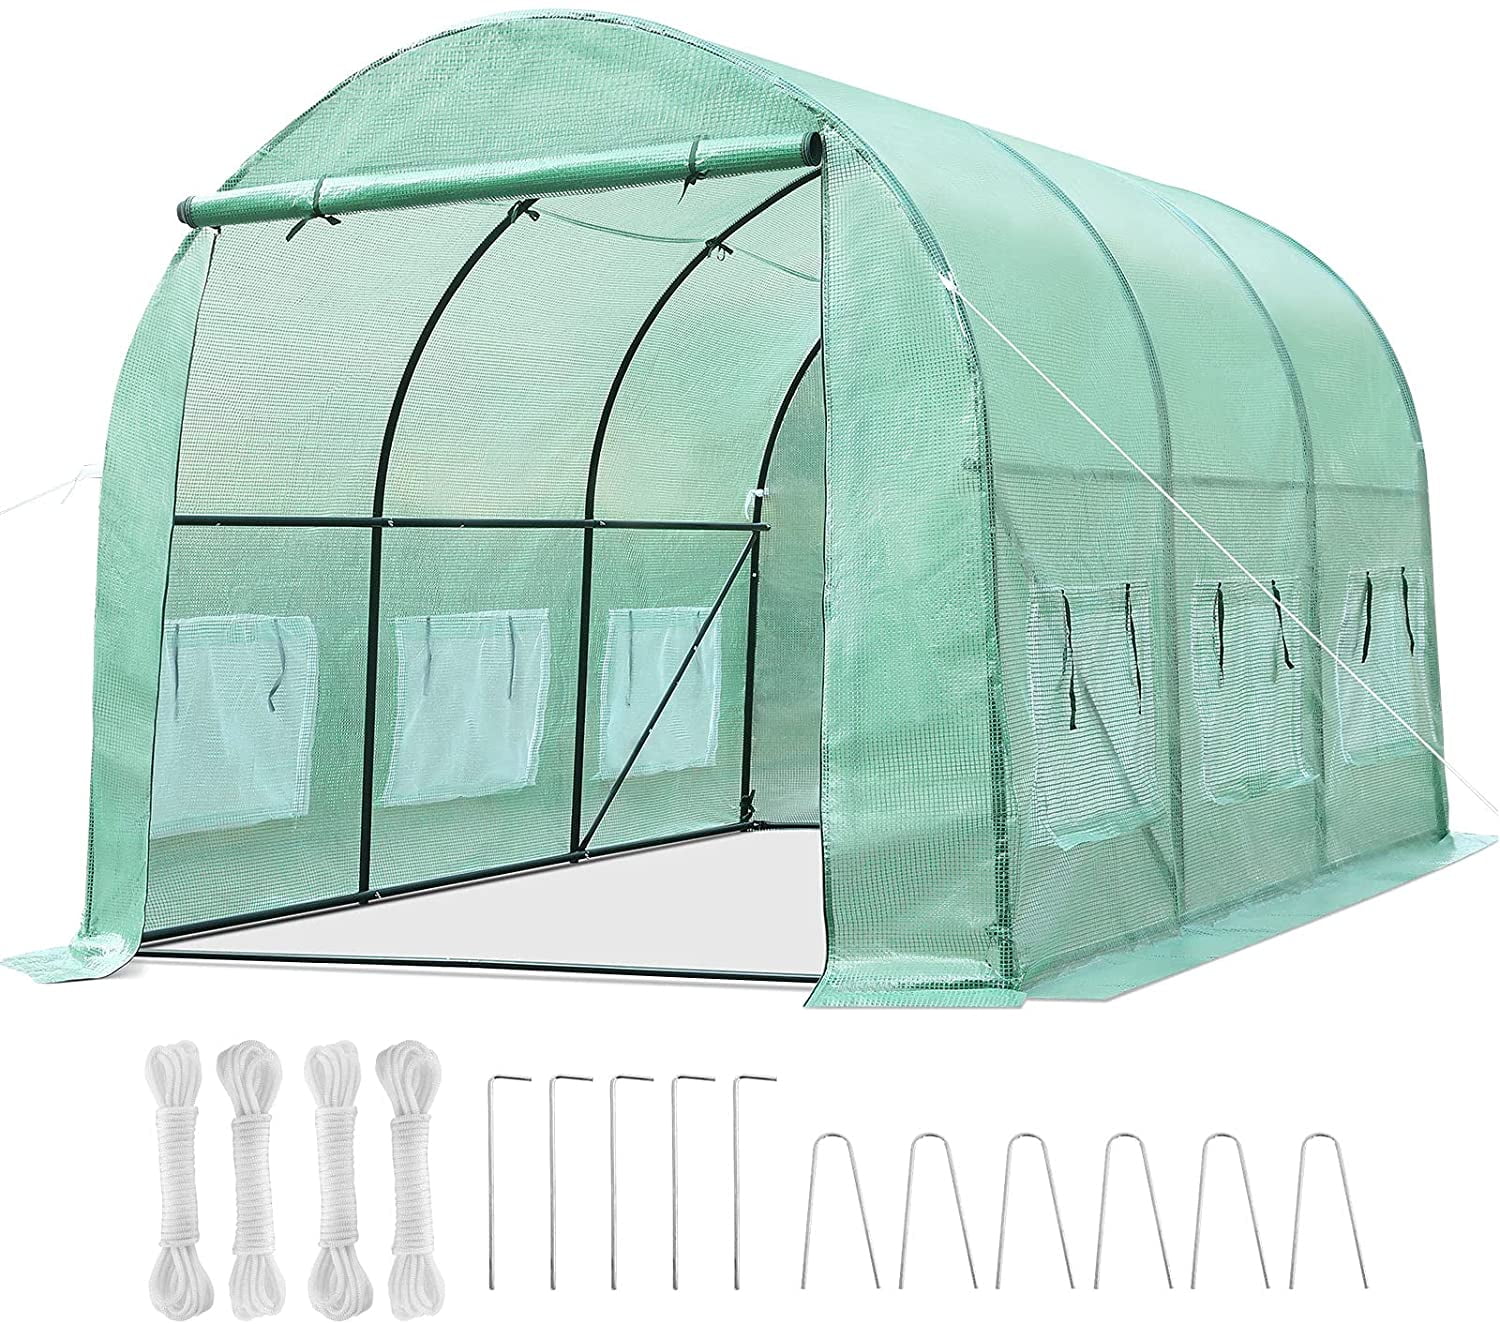 Details about   15x7x7ft Walk-in Greenhouse Tunnel Tent Gardening Accessory w/Roll-Up Windows 